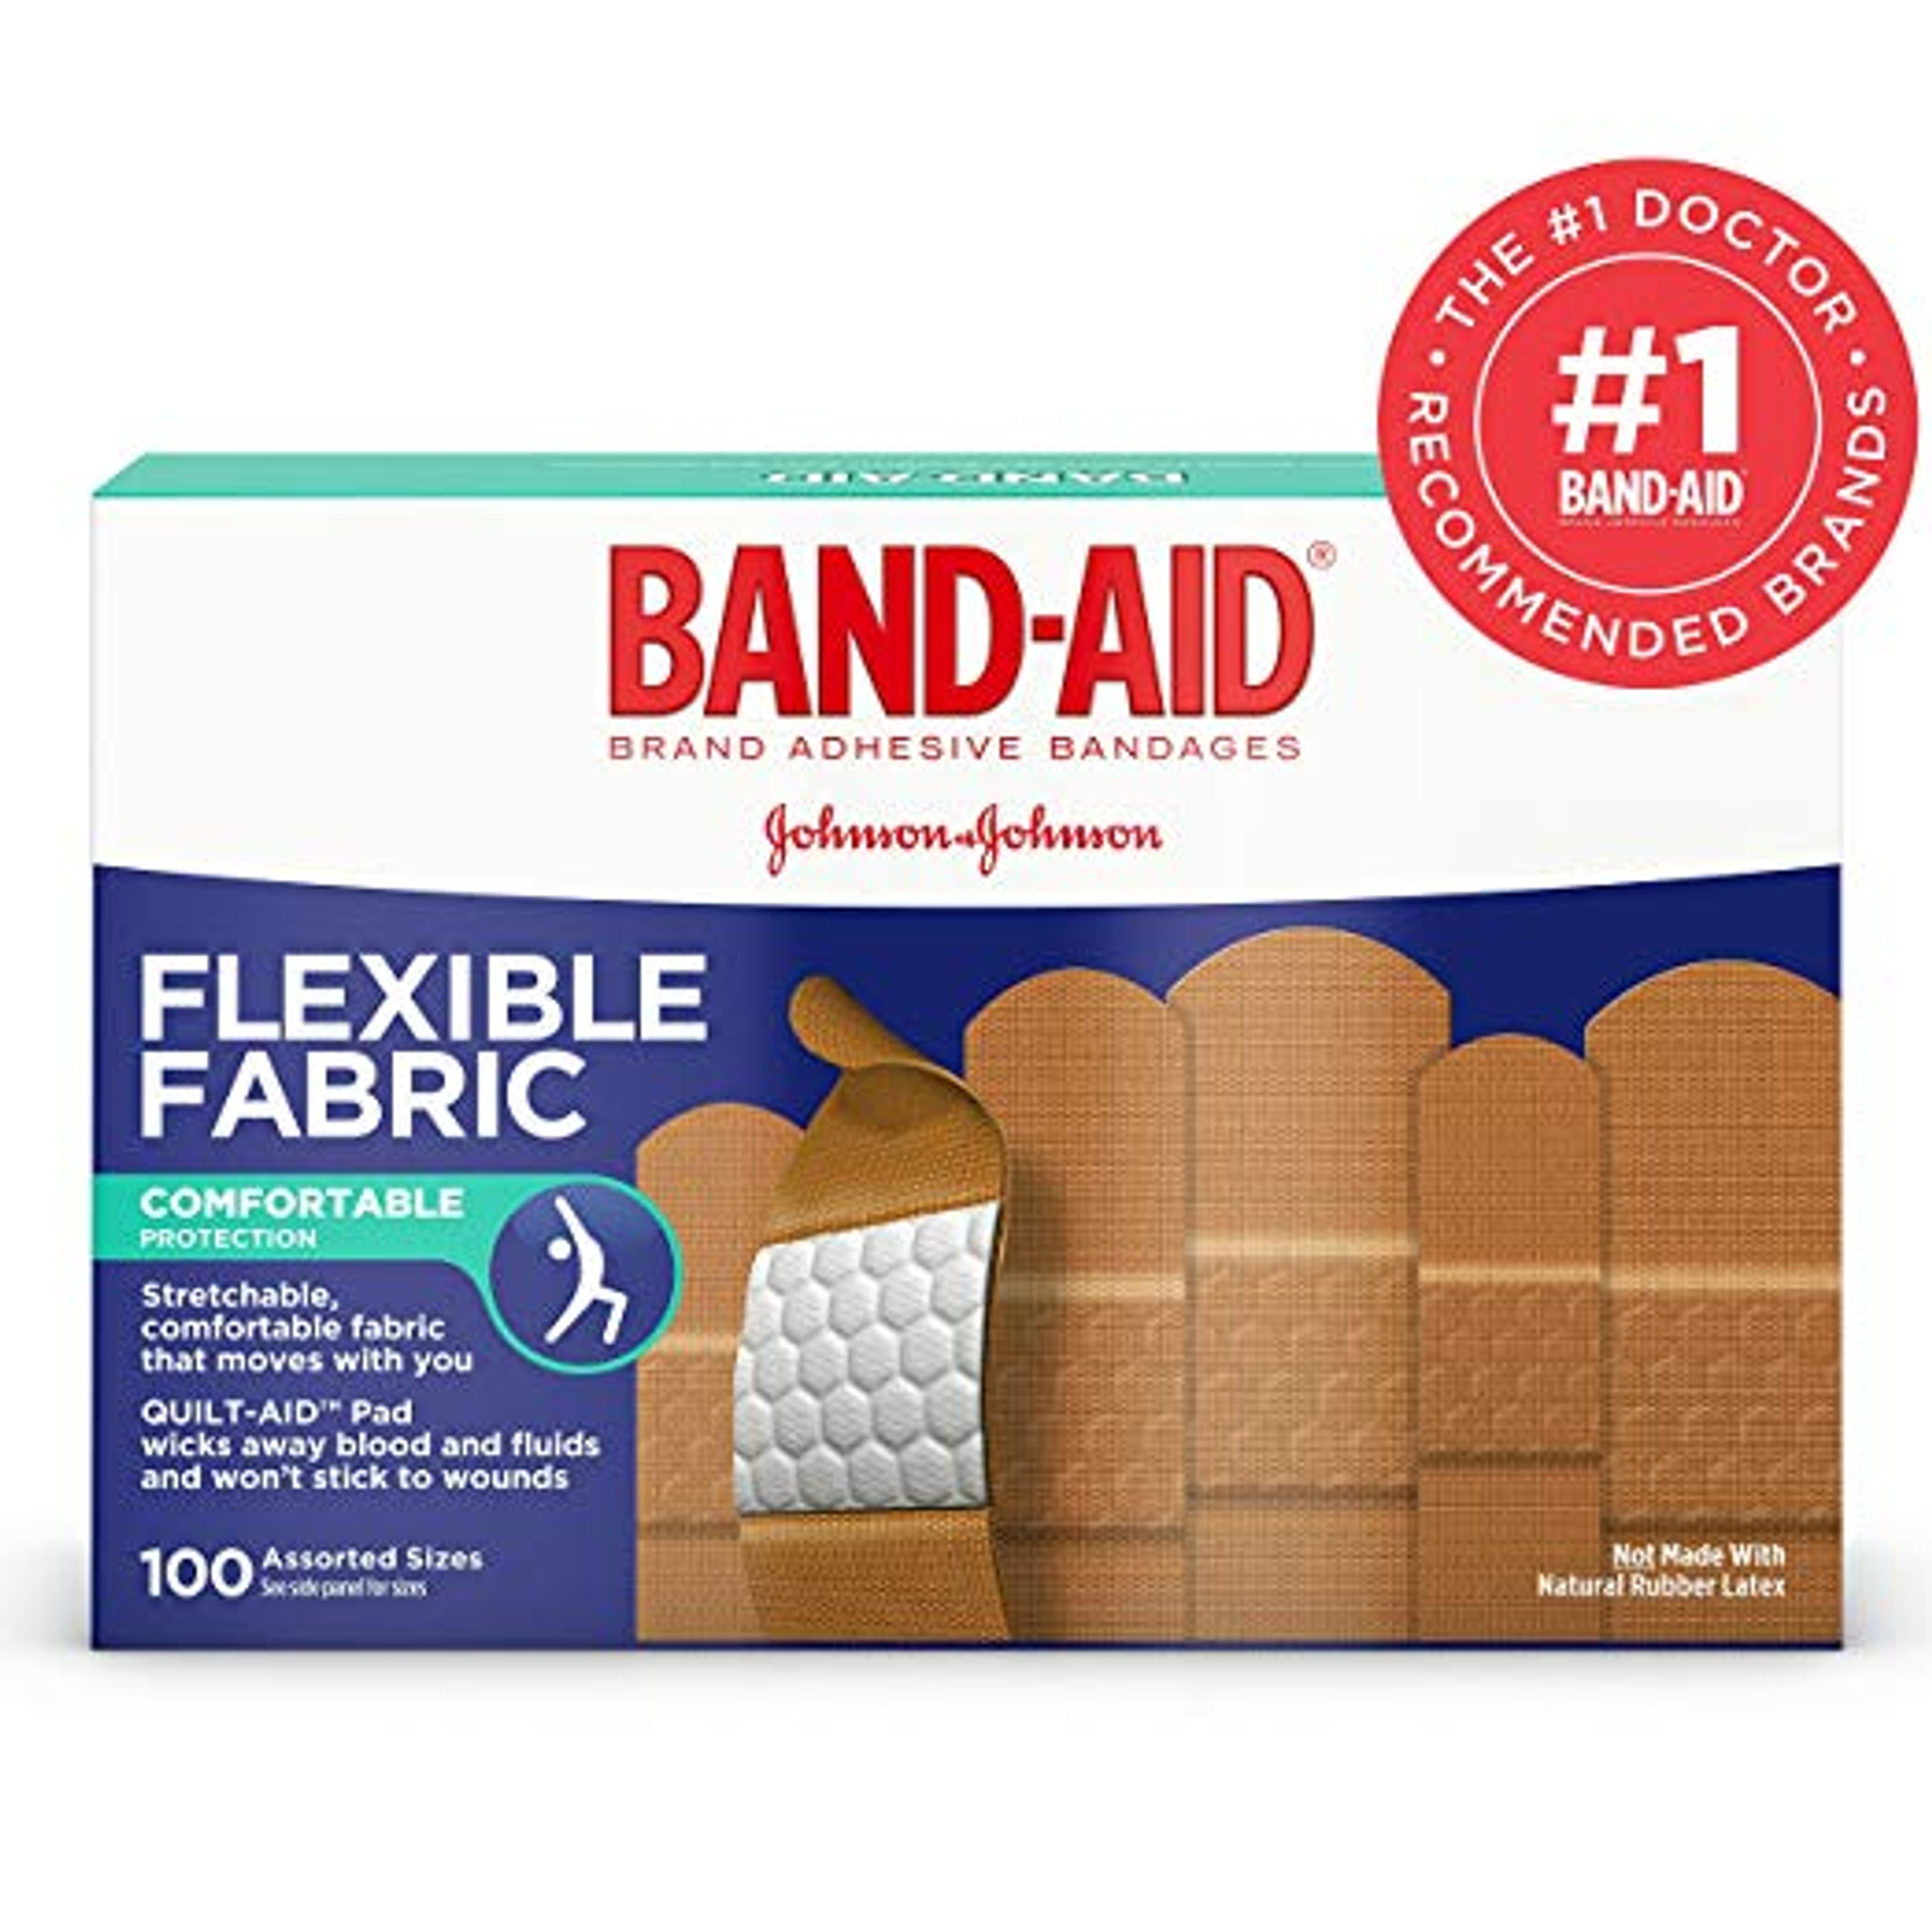 https://cdn11.bigcommerce.com/s-79bvd/images/stencil/2048x2048/products/15192/30010/Band_Aid_Brand_Flexible_Fabric_Adhesive_Bandages_for_Wound_Care_and_First_Aid_Assorted_Size_100_ct_1__74632.1549557869.jpg?c=2